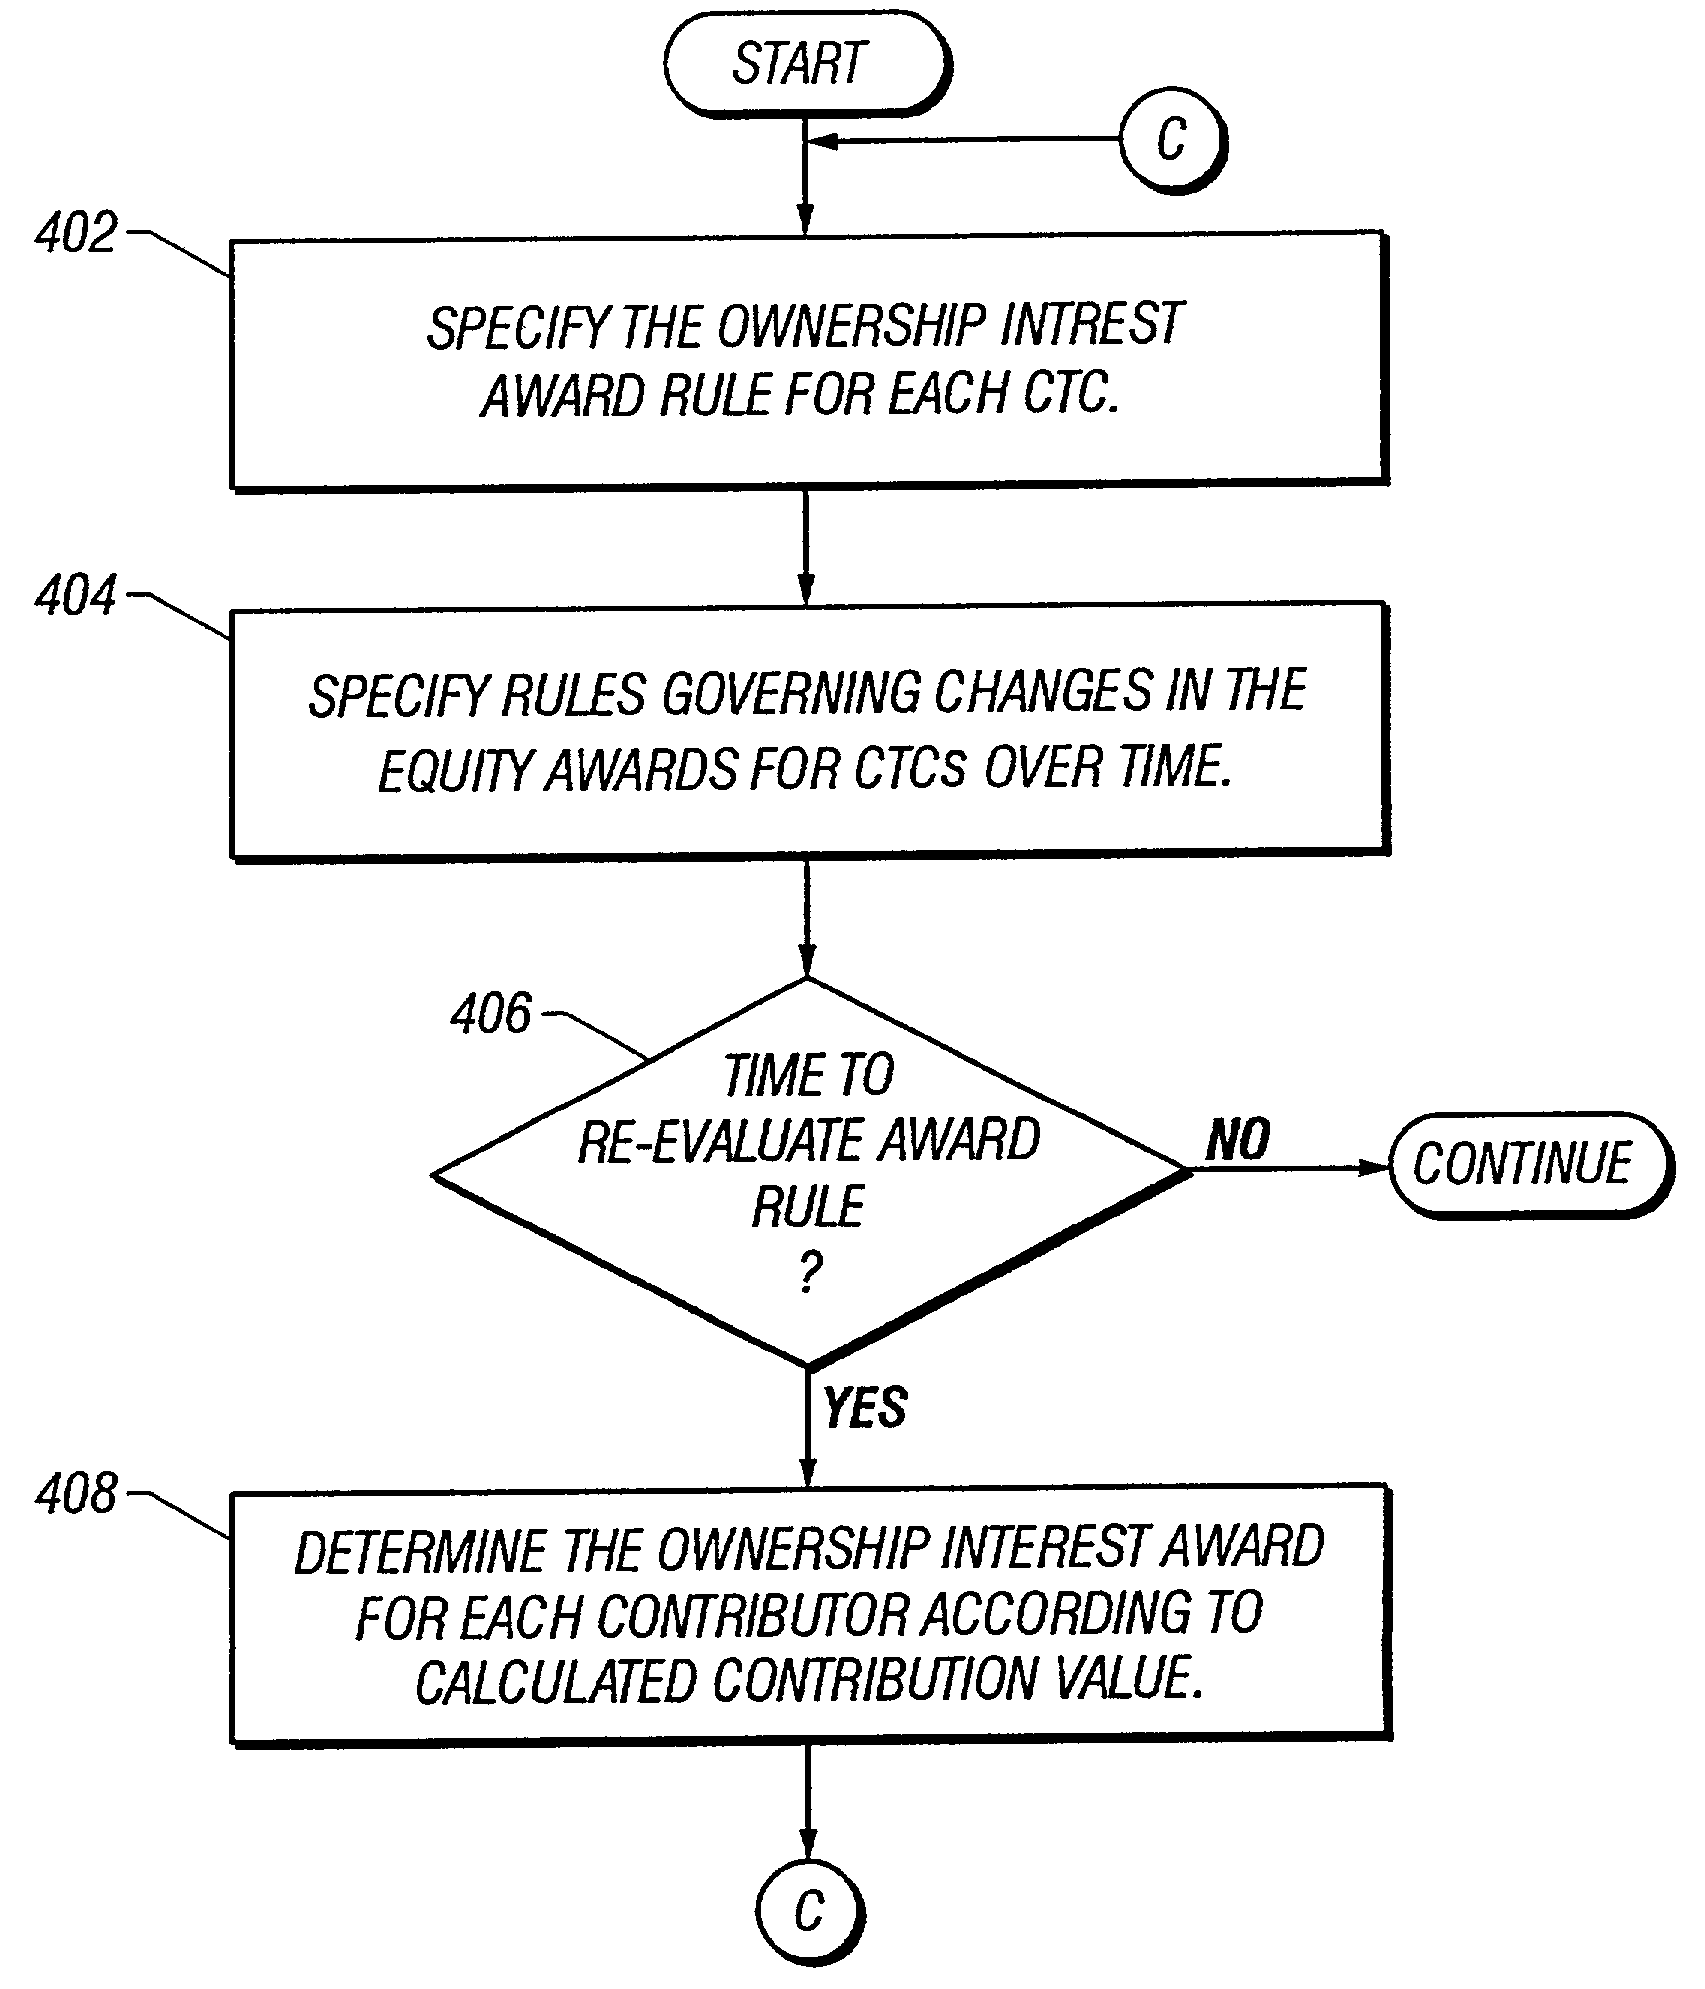 Dynamic determination of ownership interest based on contribution